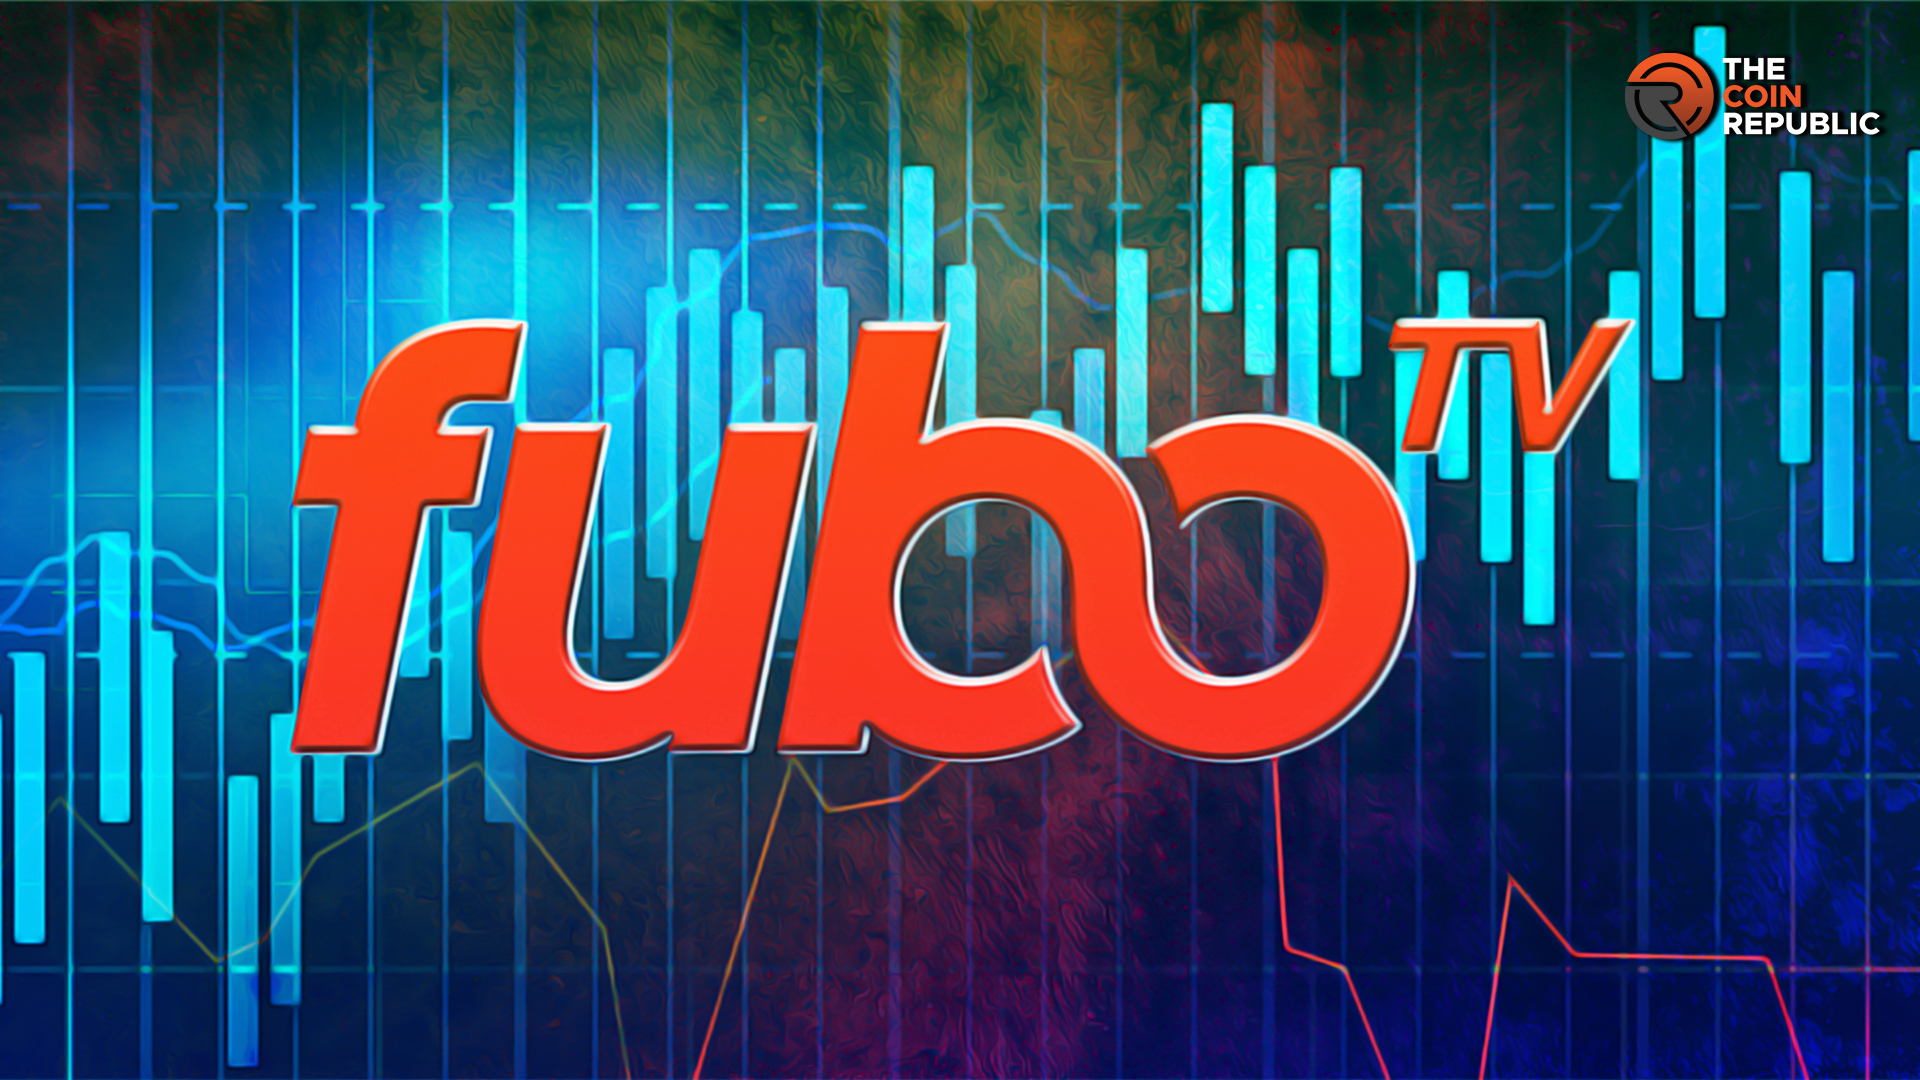 Fubotv Stock At A Make or Break Level, Who Will Dominate?   